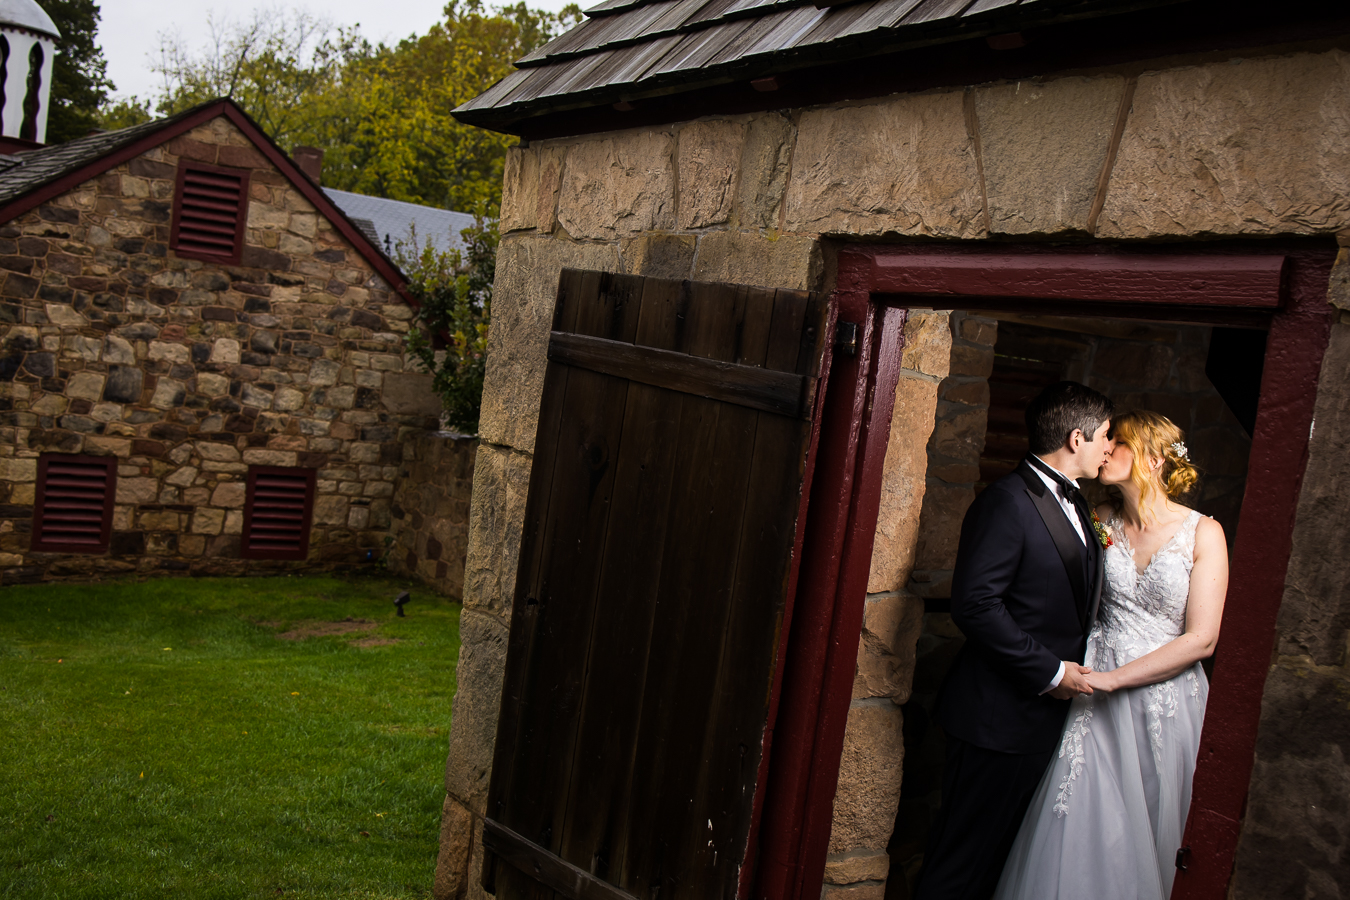 unique perspective of the bride and groom as they share a kiss together inside of the stone building during their rainy day wedding at Elizabeth furnace in lititz, pa 